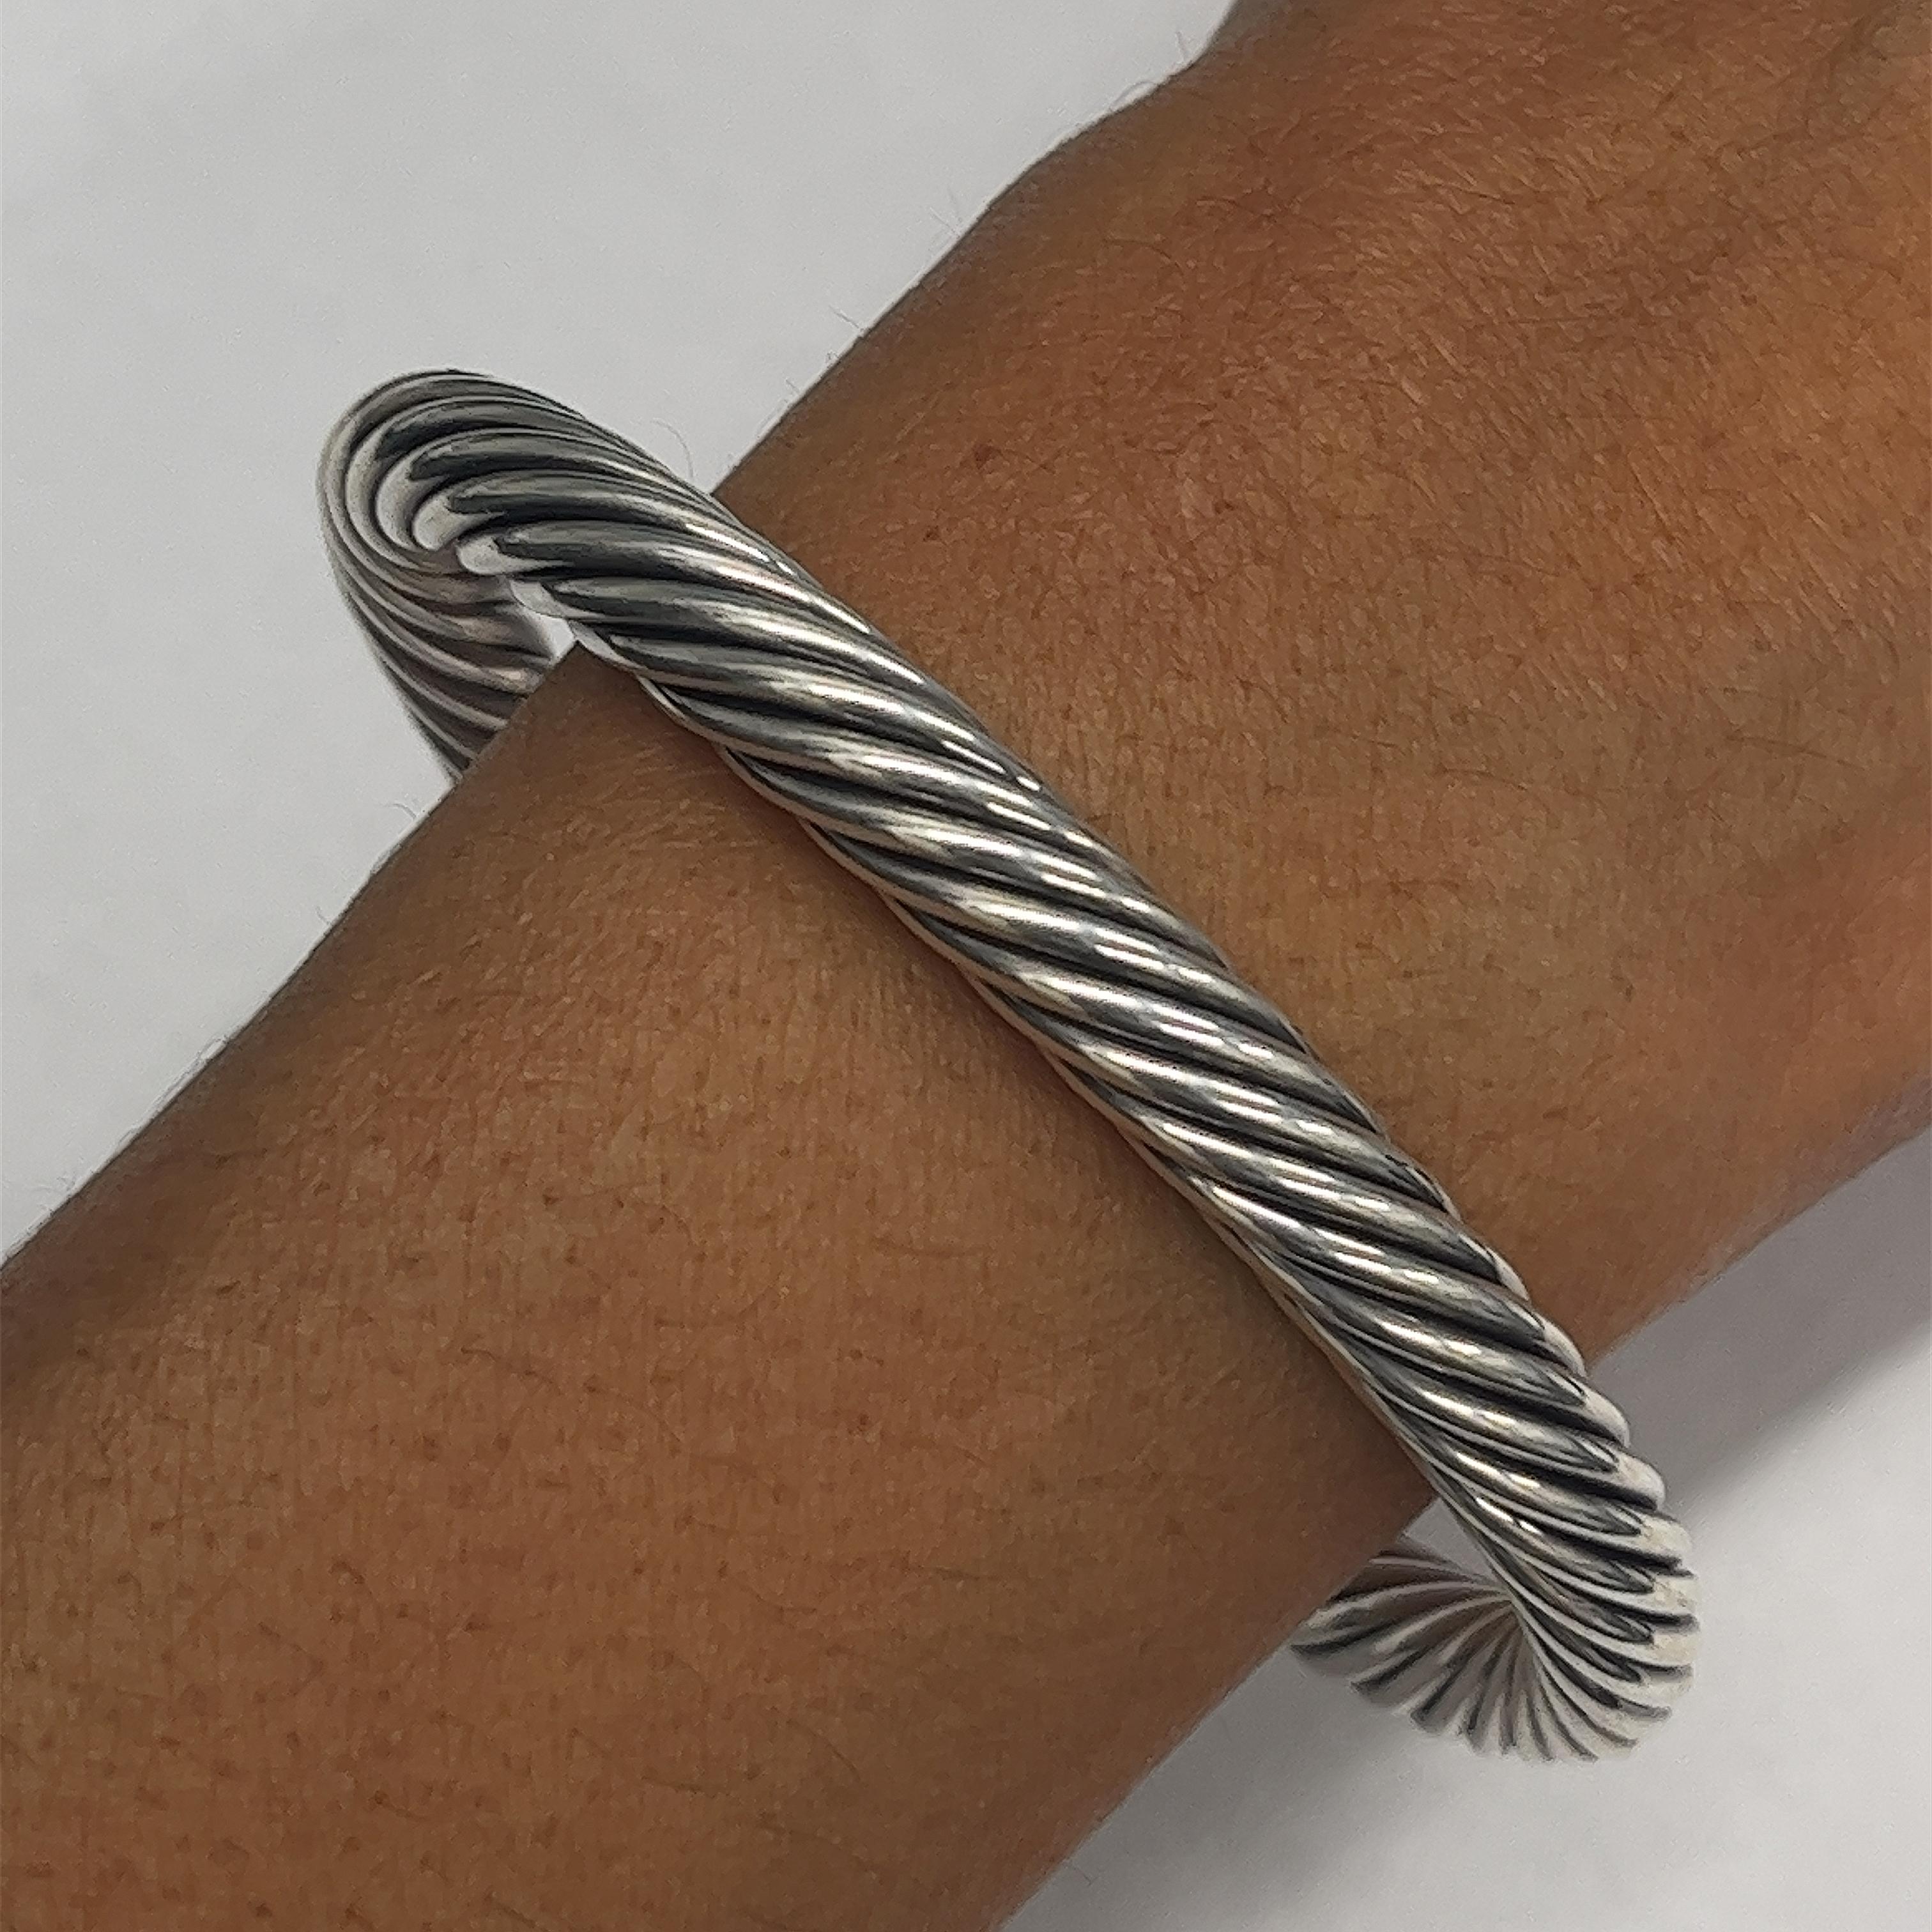 David Yurman Sterling Silver 18ct Classic Cable Bangle With Diamond End Caps 2